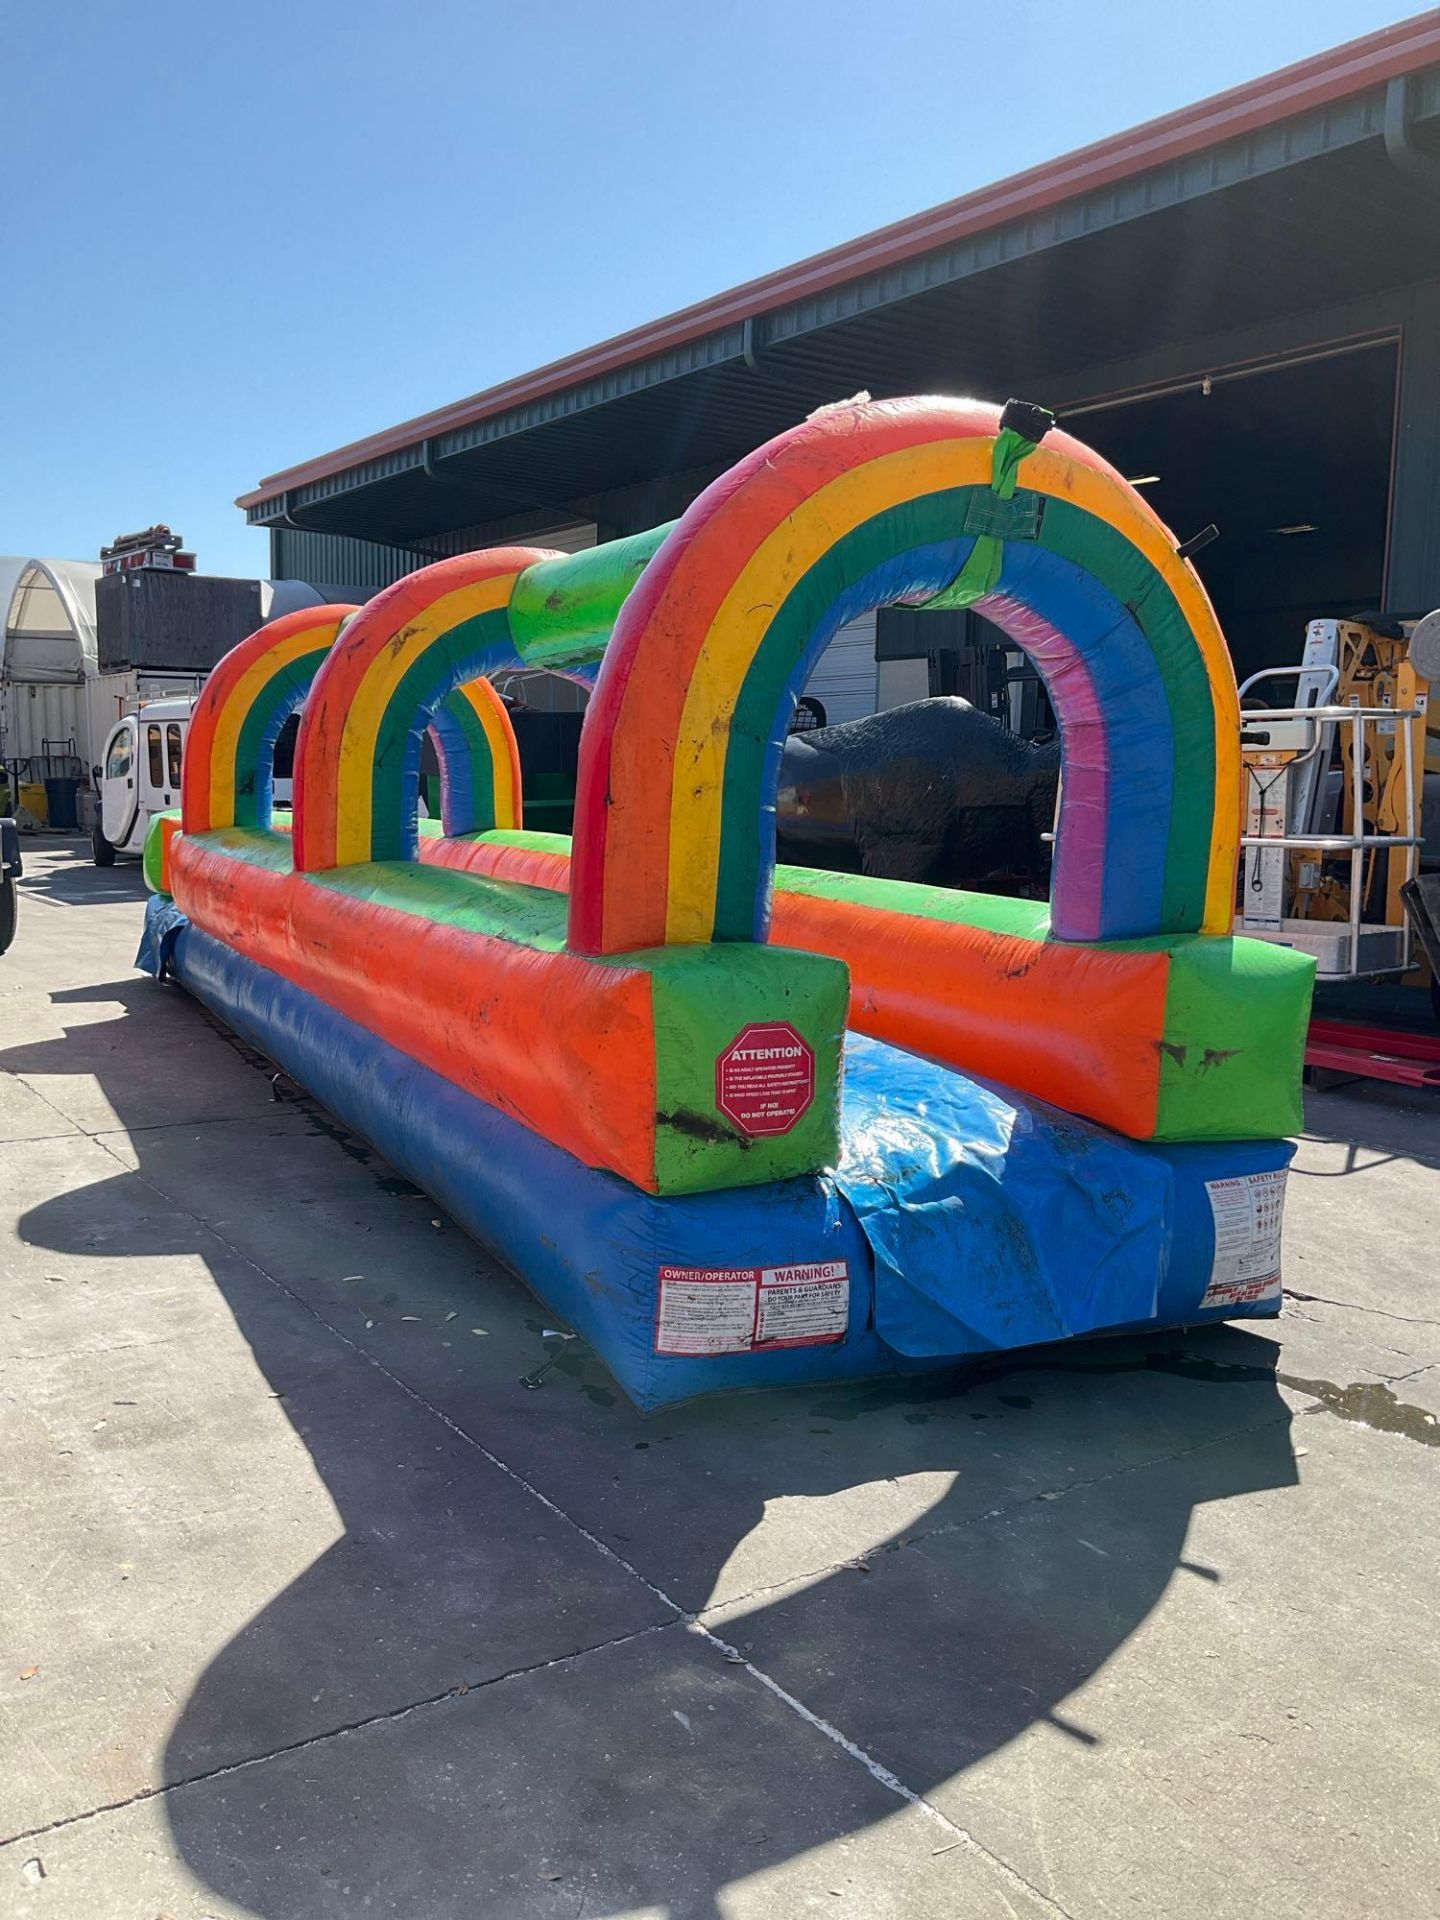 RAINBOW 25FT SLIP -N-SLIDE BOUNCE HOUSE WITH BLOWER - Image 3 of 11